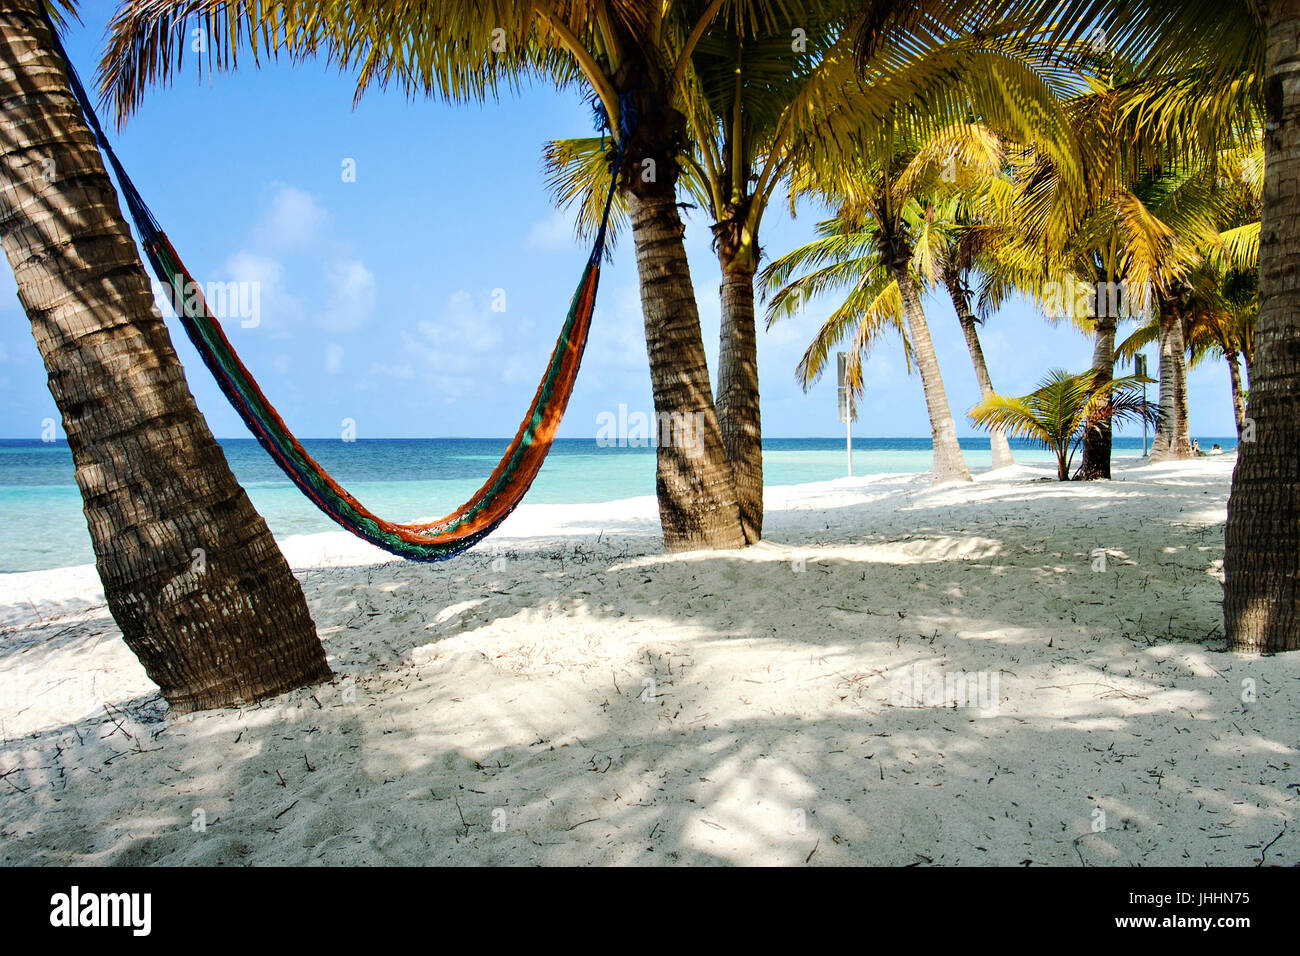 South Water Caye, Belize. Beach with a hammock and ocean view. Stock Photo